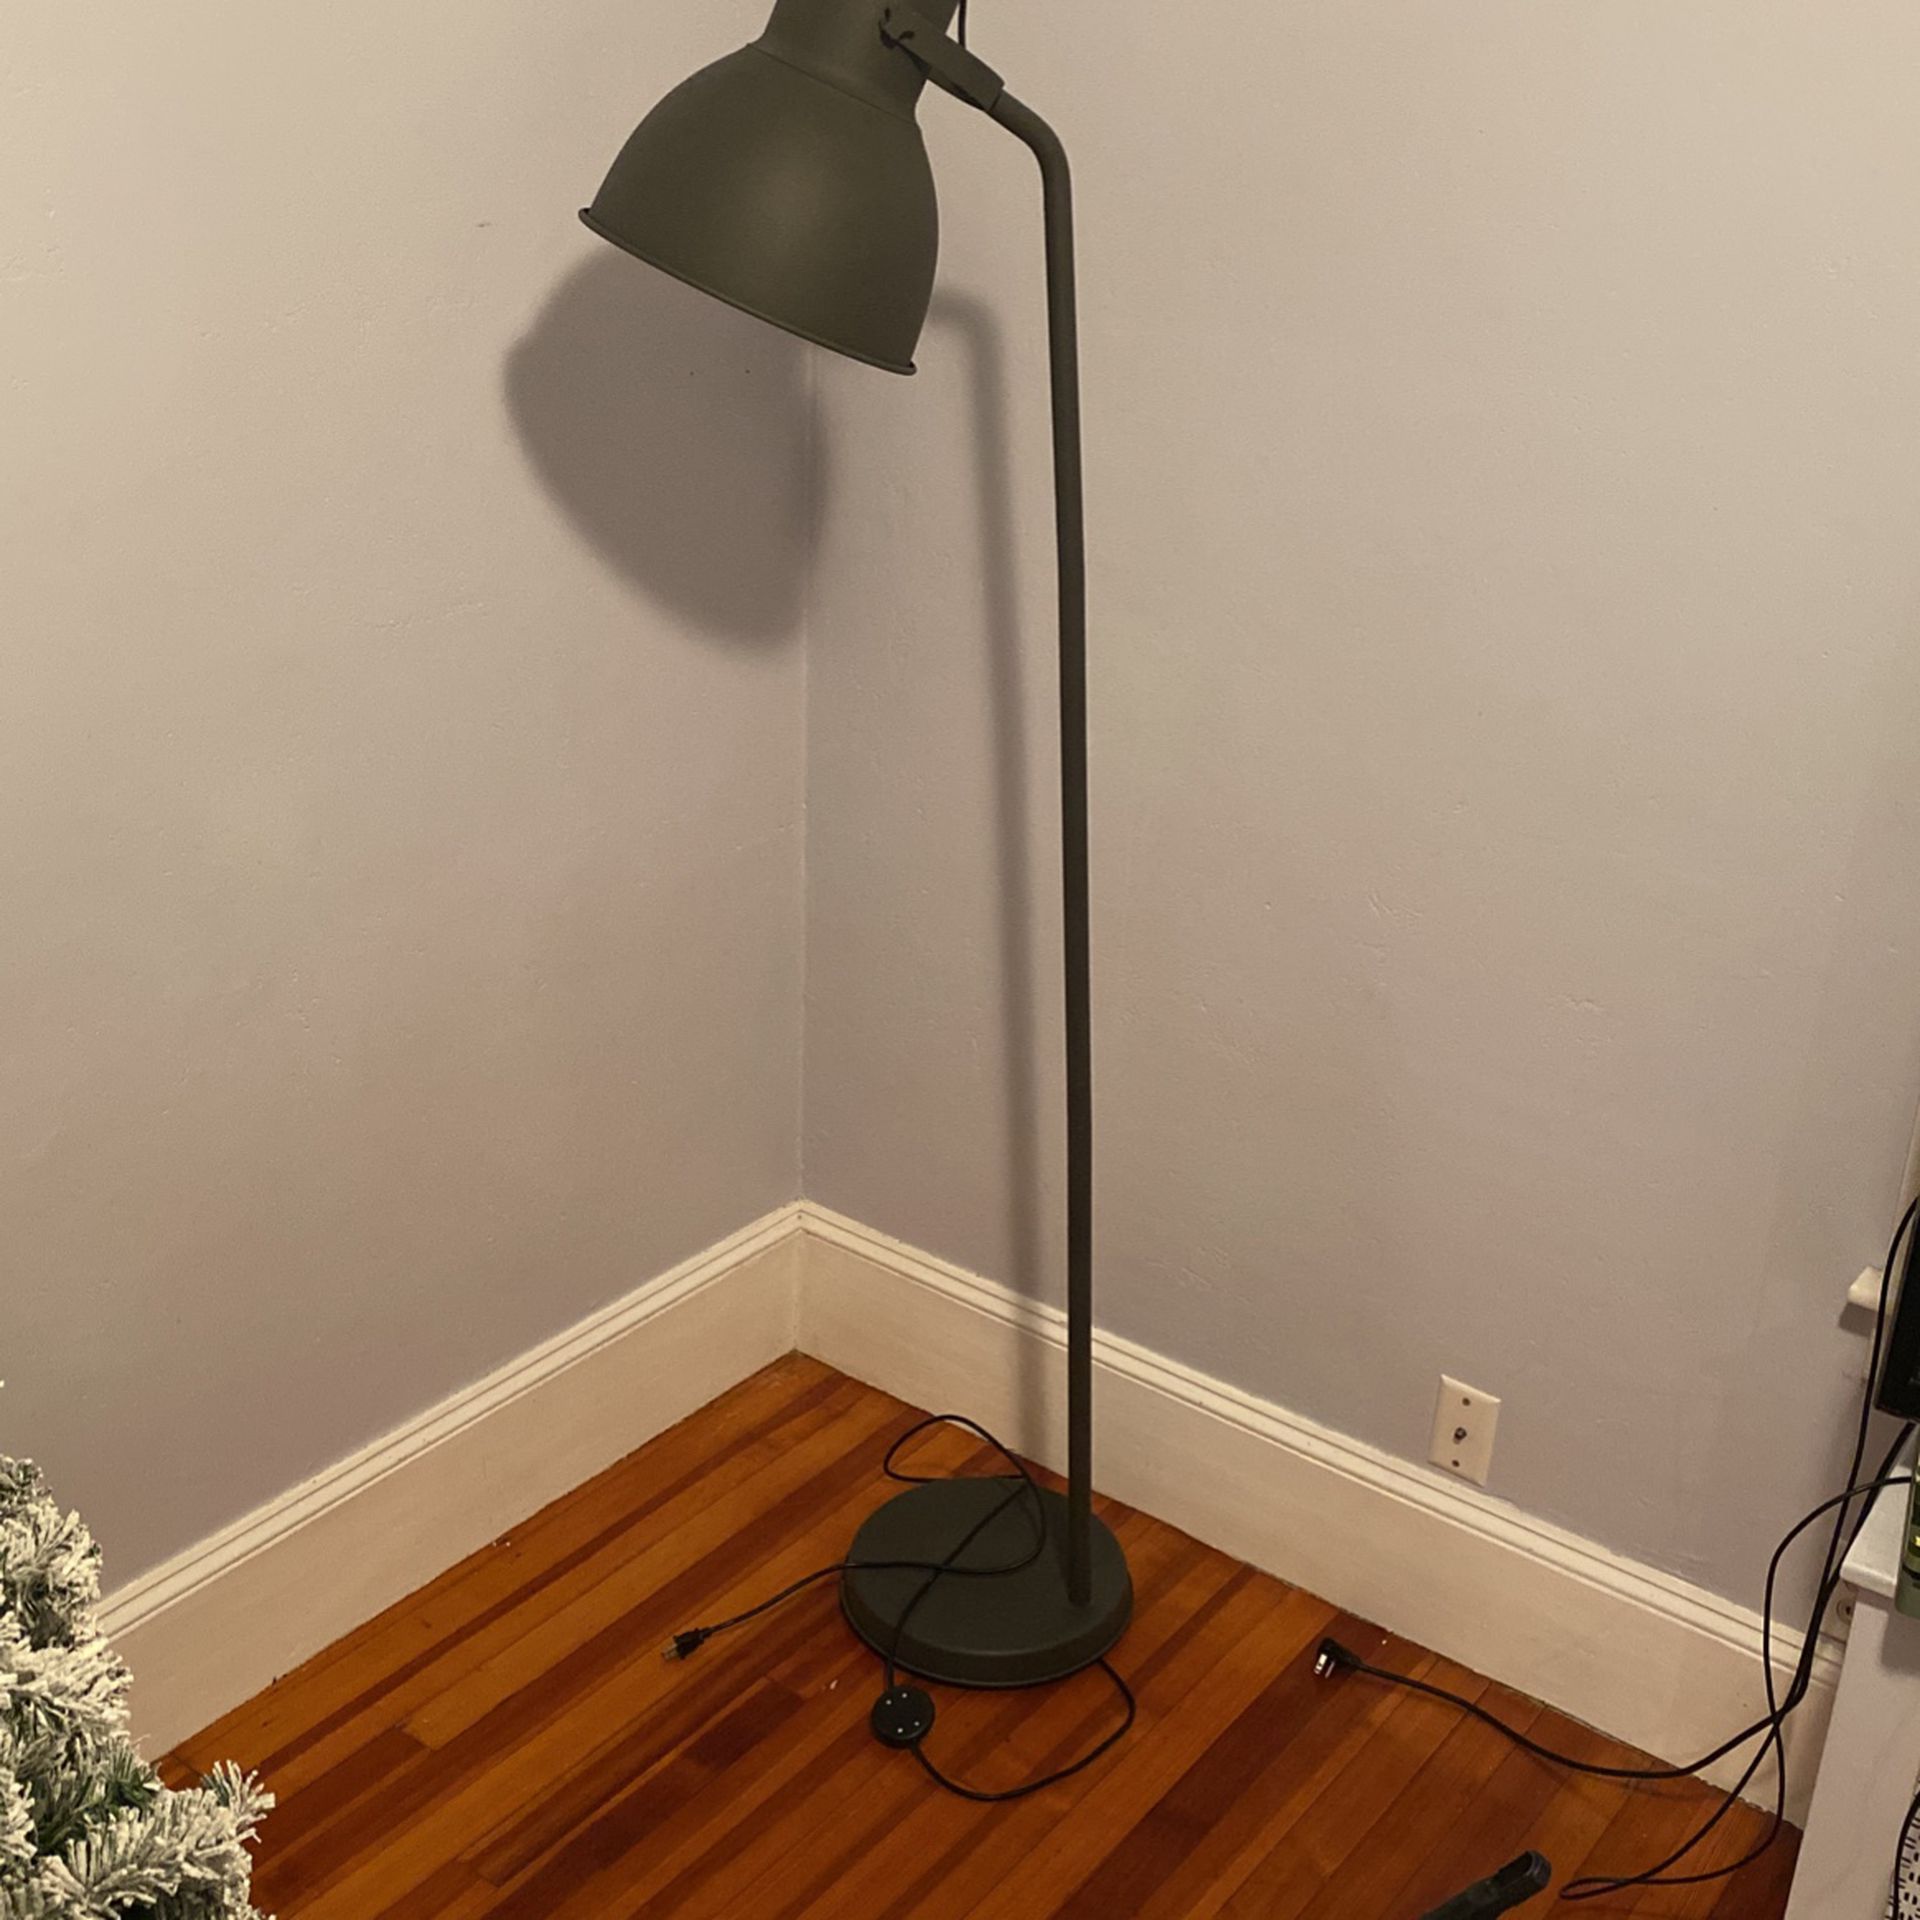 Lamp From IKEA